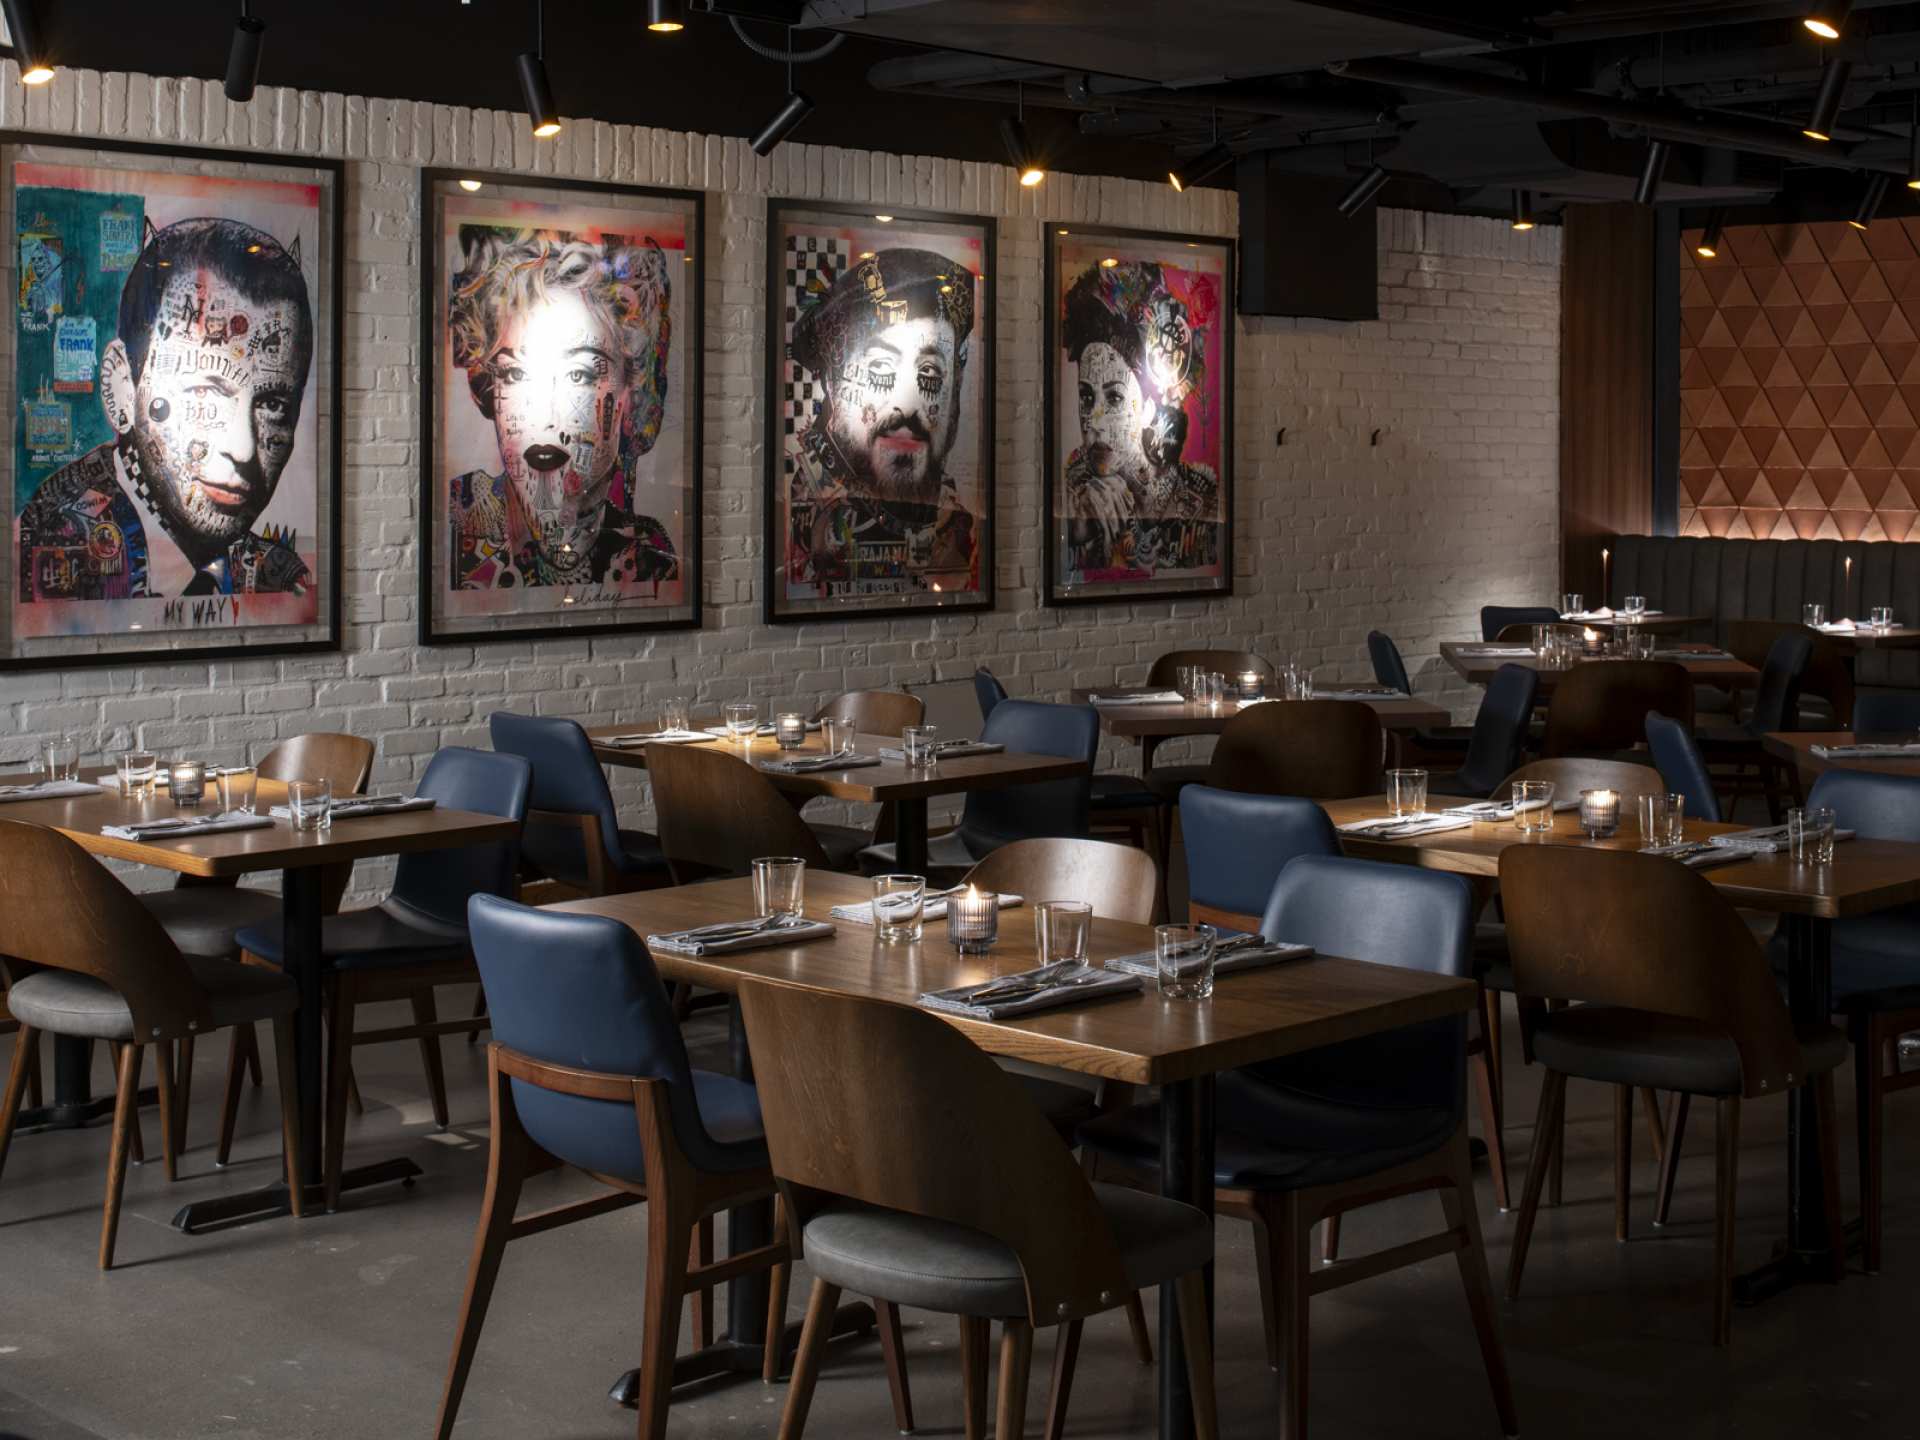 Best new restaurants Toronto | Portraits on the walls in the dining room at Edna + Vita